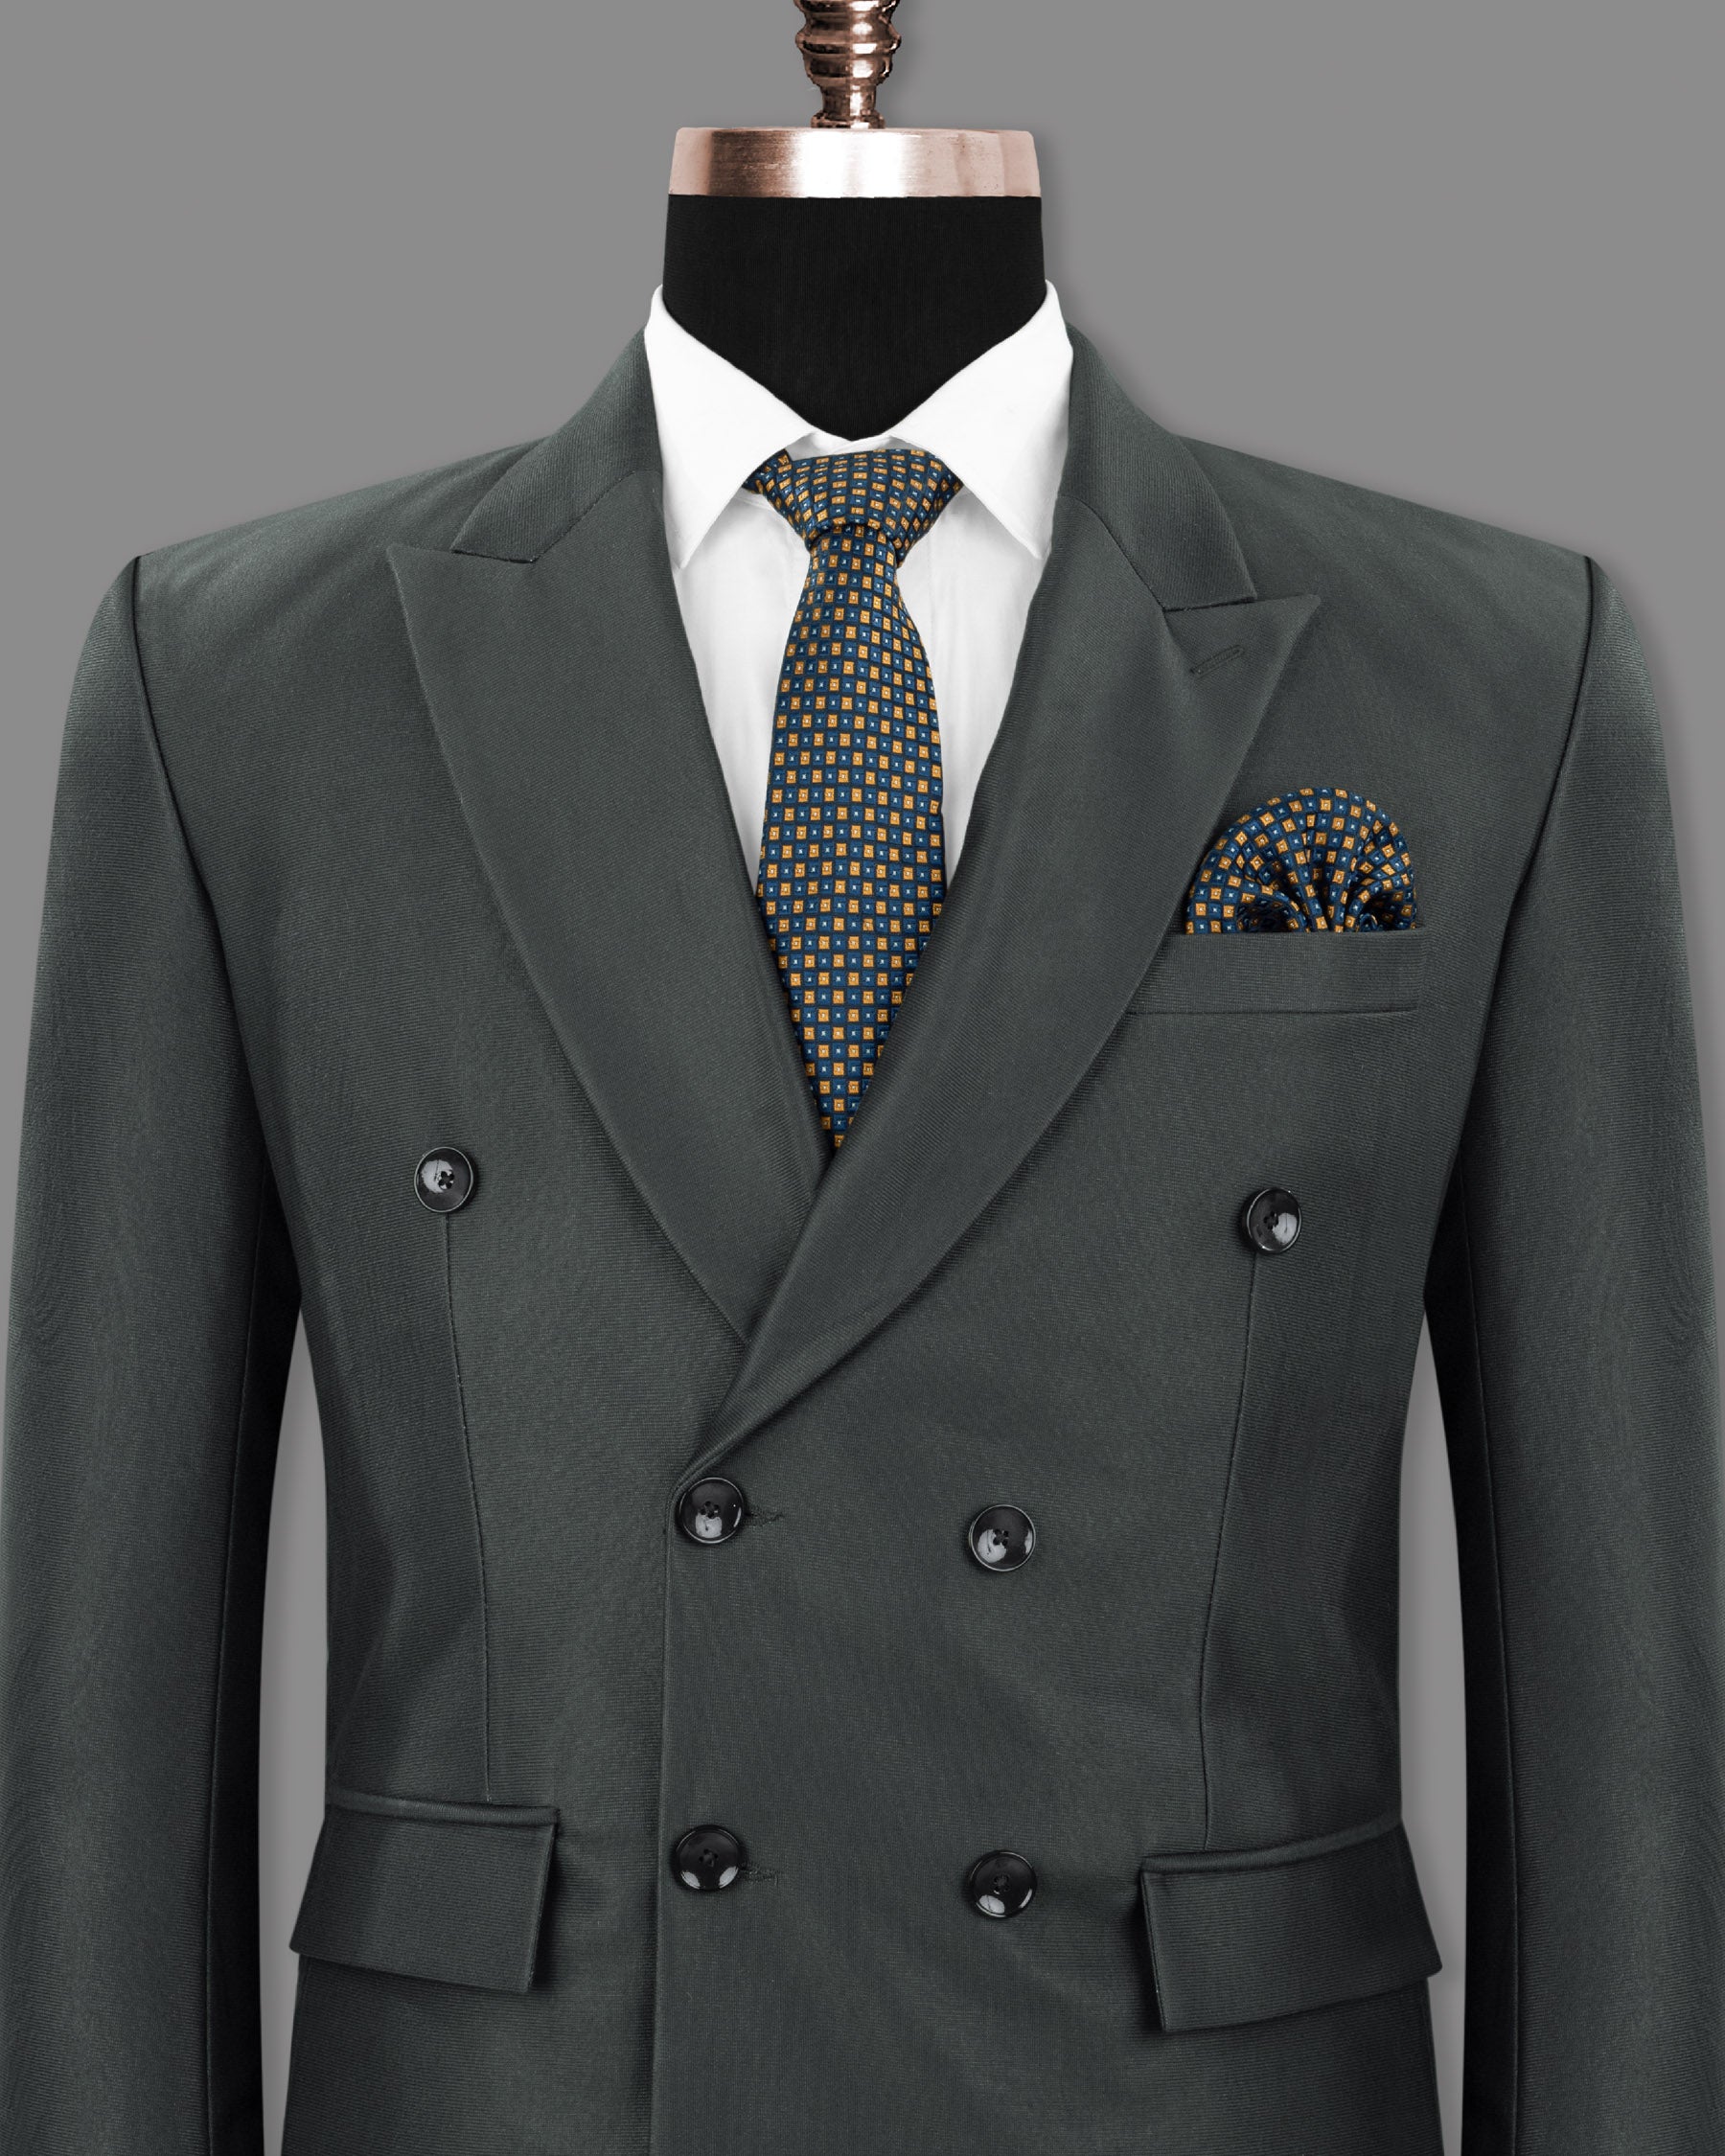 Greyish Green Premium Cotton Double Breasted Blazer BL1214-DB-60, BL1214-DB-48, BL1214-DB-36, BL1214-DB-38, BL1214-DB-40, BL1214-DB-44, BL1214-DB-46, BL1214-DB-50, BL1214-DB-52, BL1214-DB-54, BL1214-DB-56, BL1214-DB-58, BL1214-DB-42